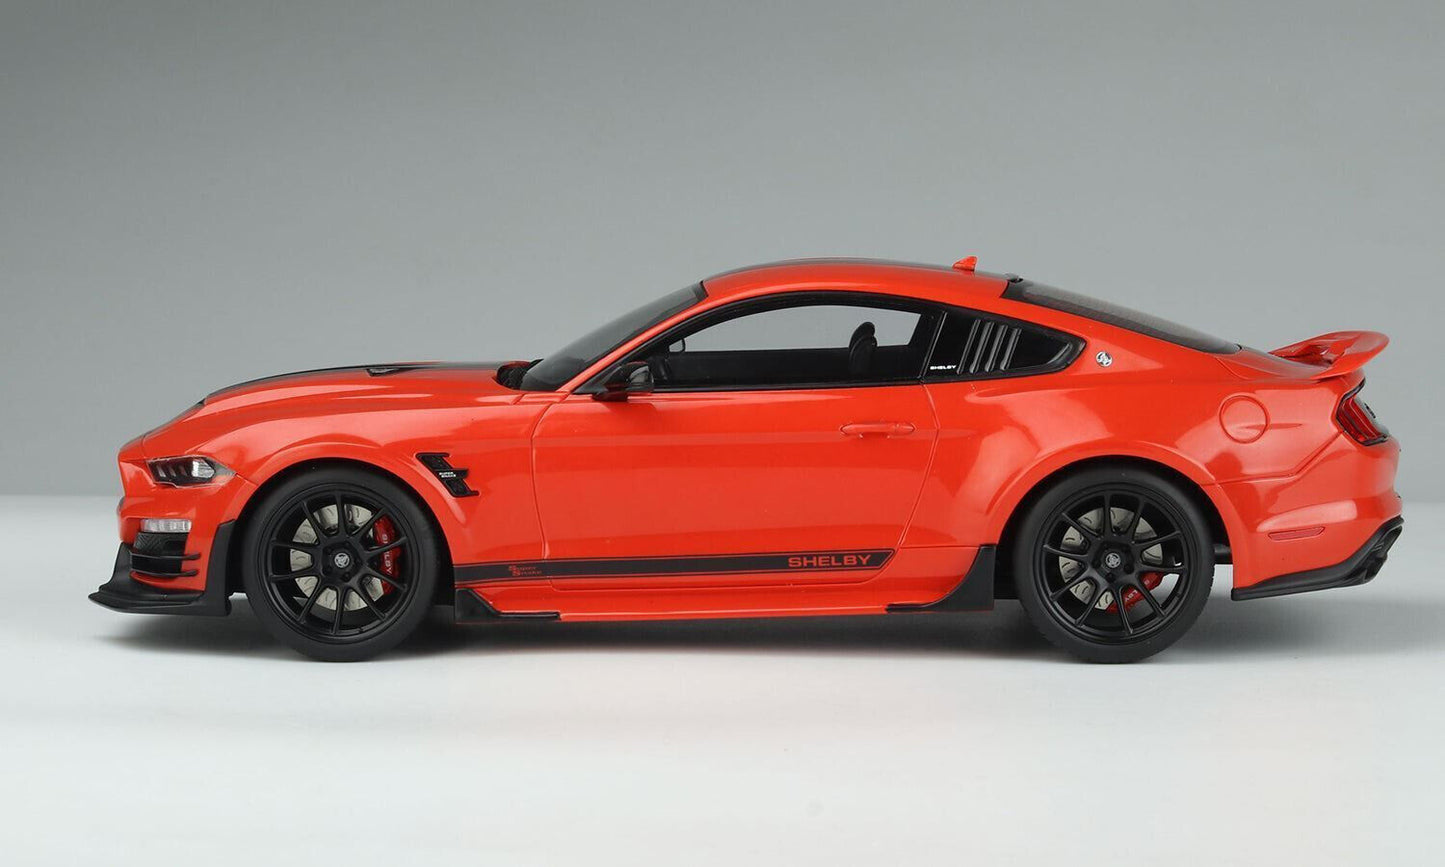 1/18 ACME GT SPIRIT 2021  FORD MUSTANG SHELBY SNAKE COUPE ORANGE  US058